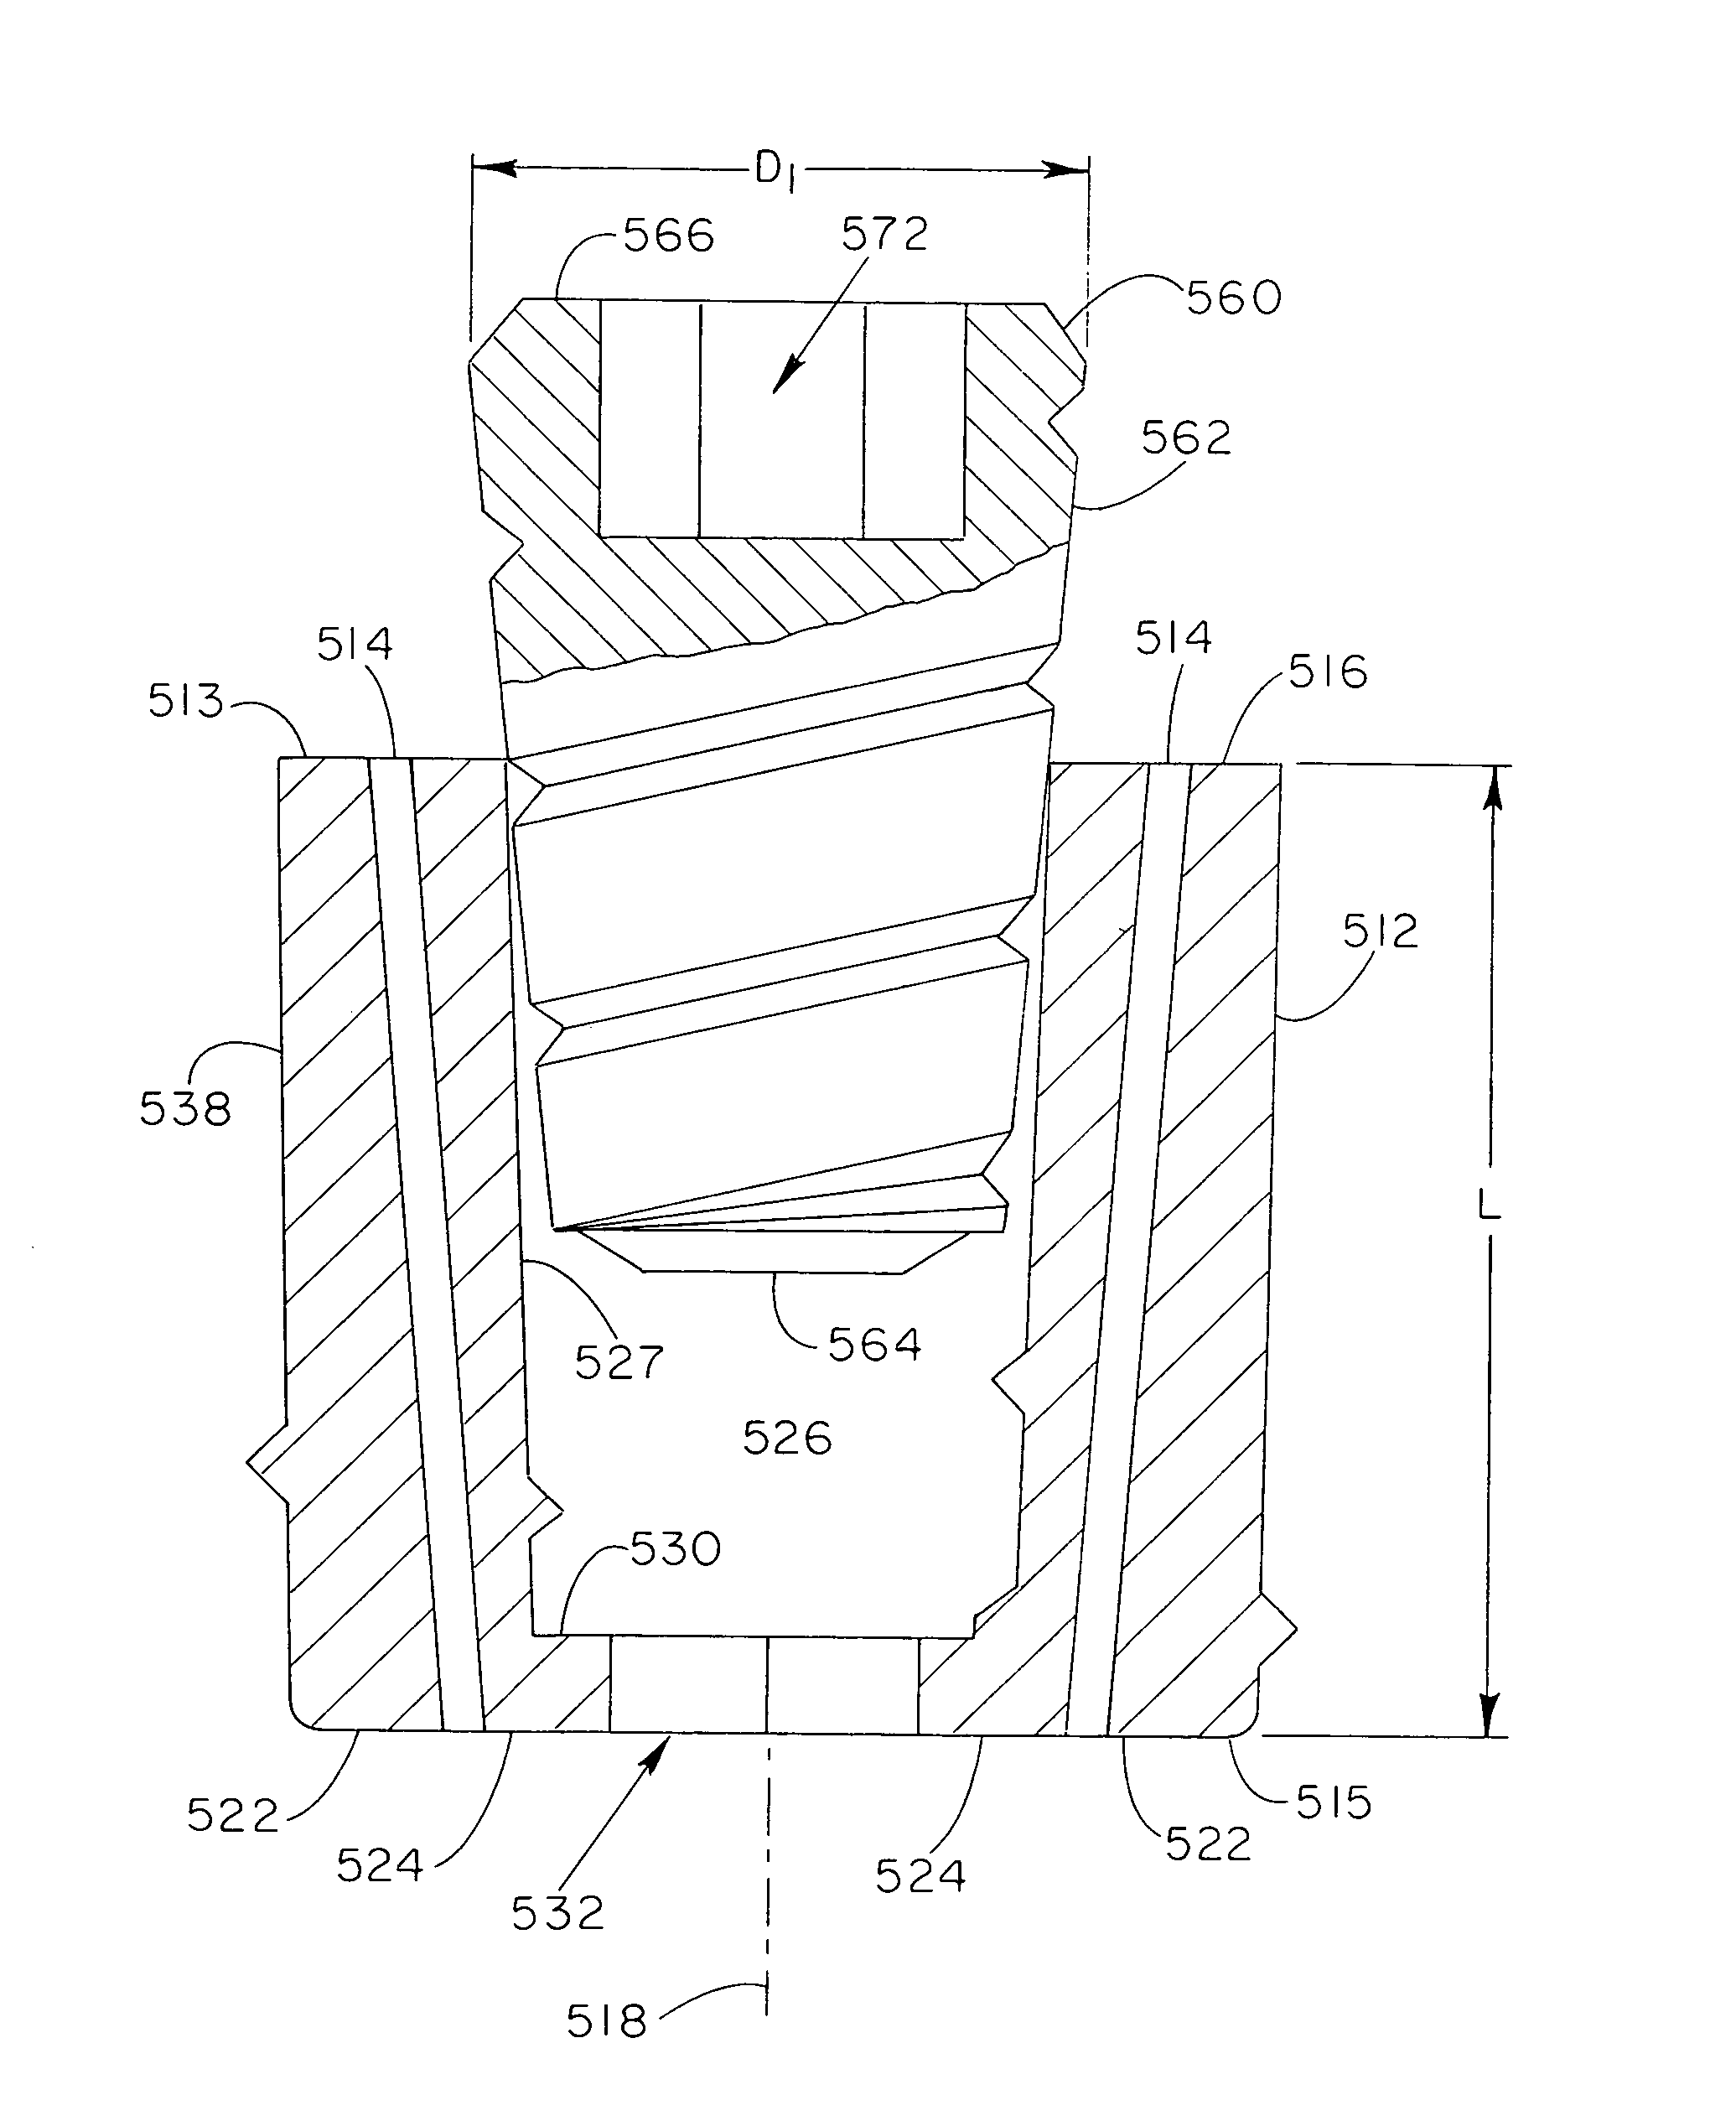 Graft anchoring device